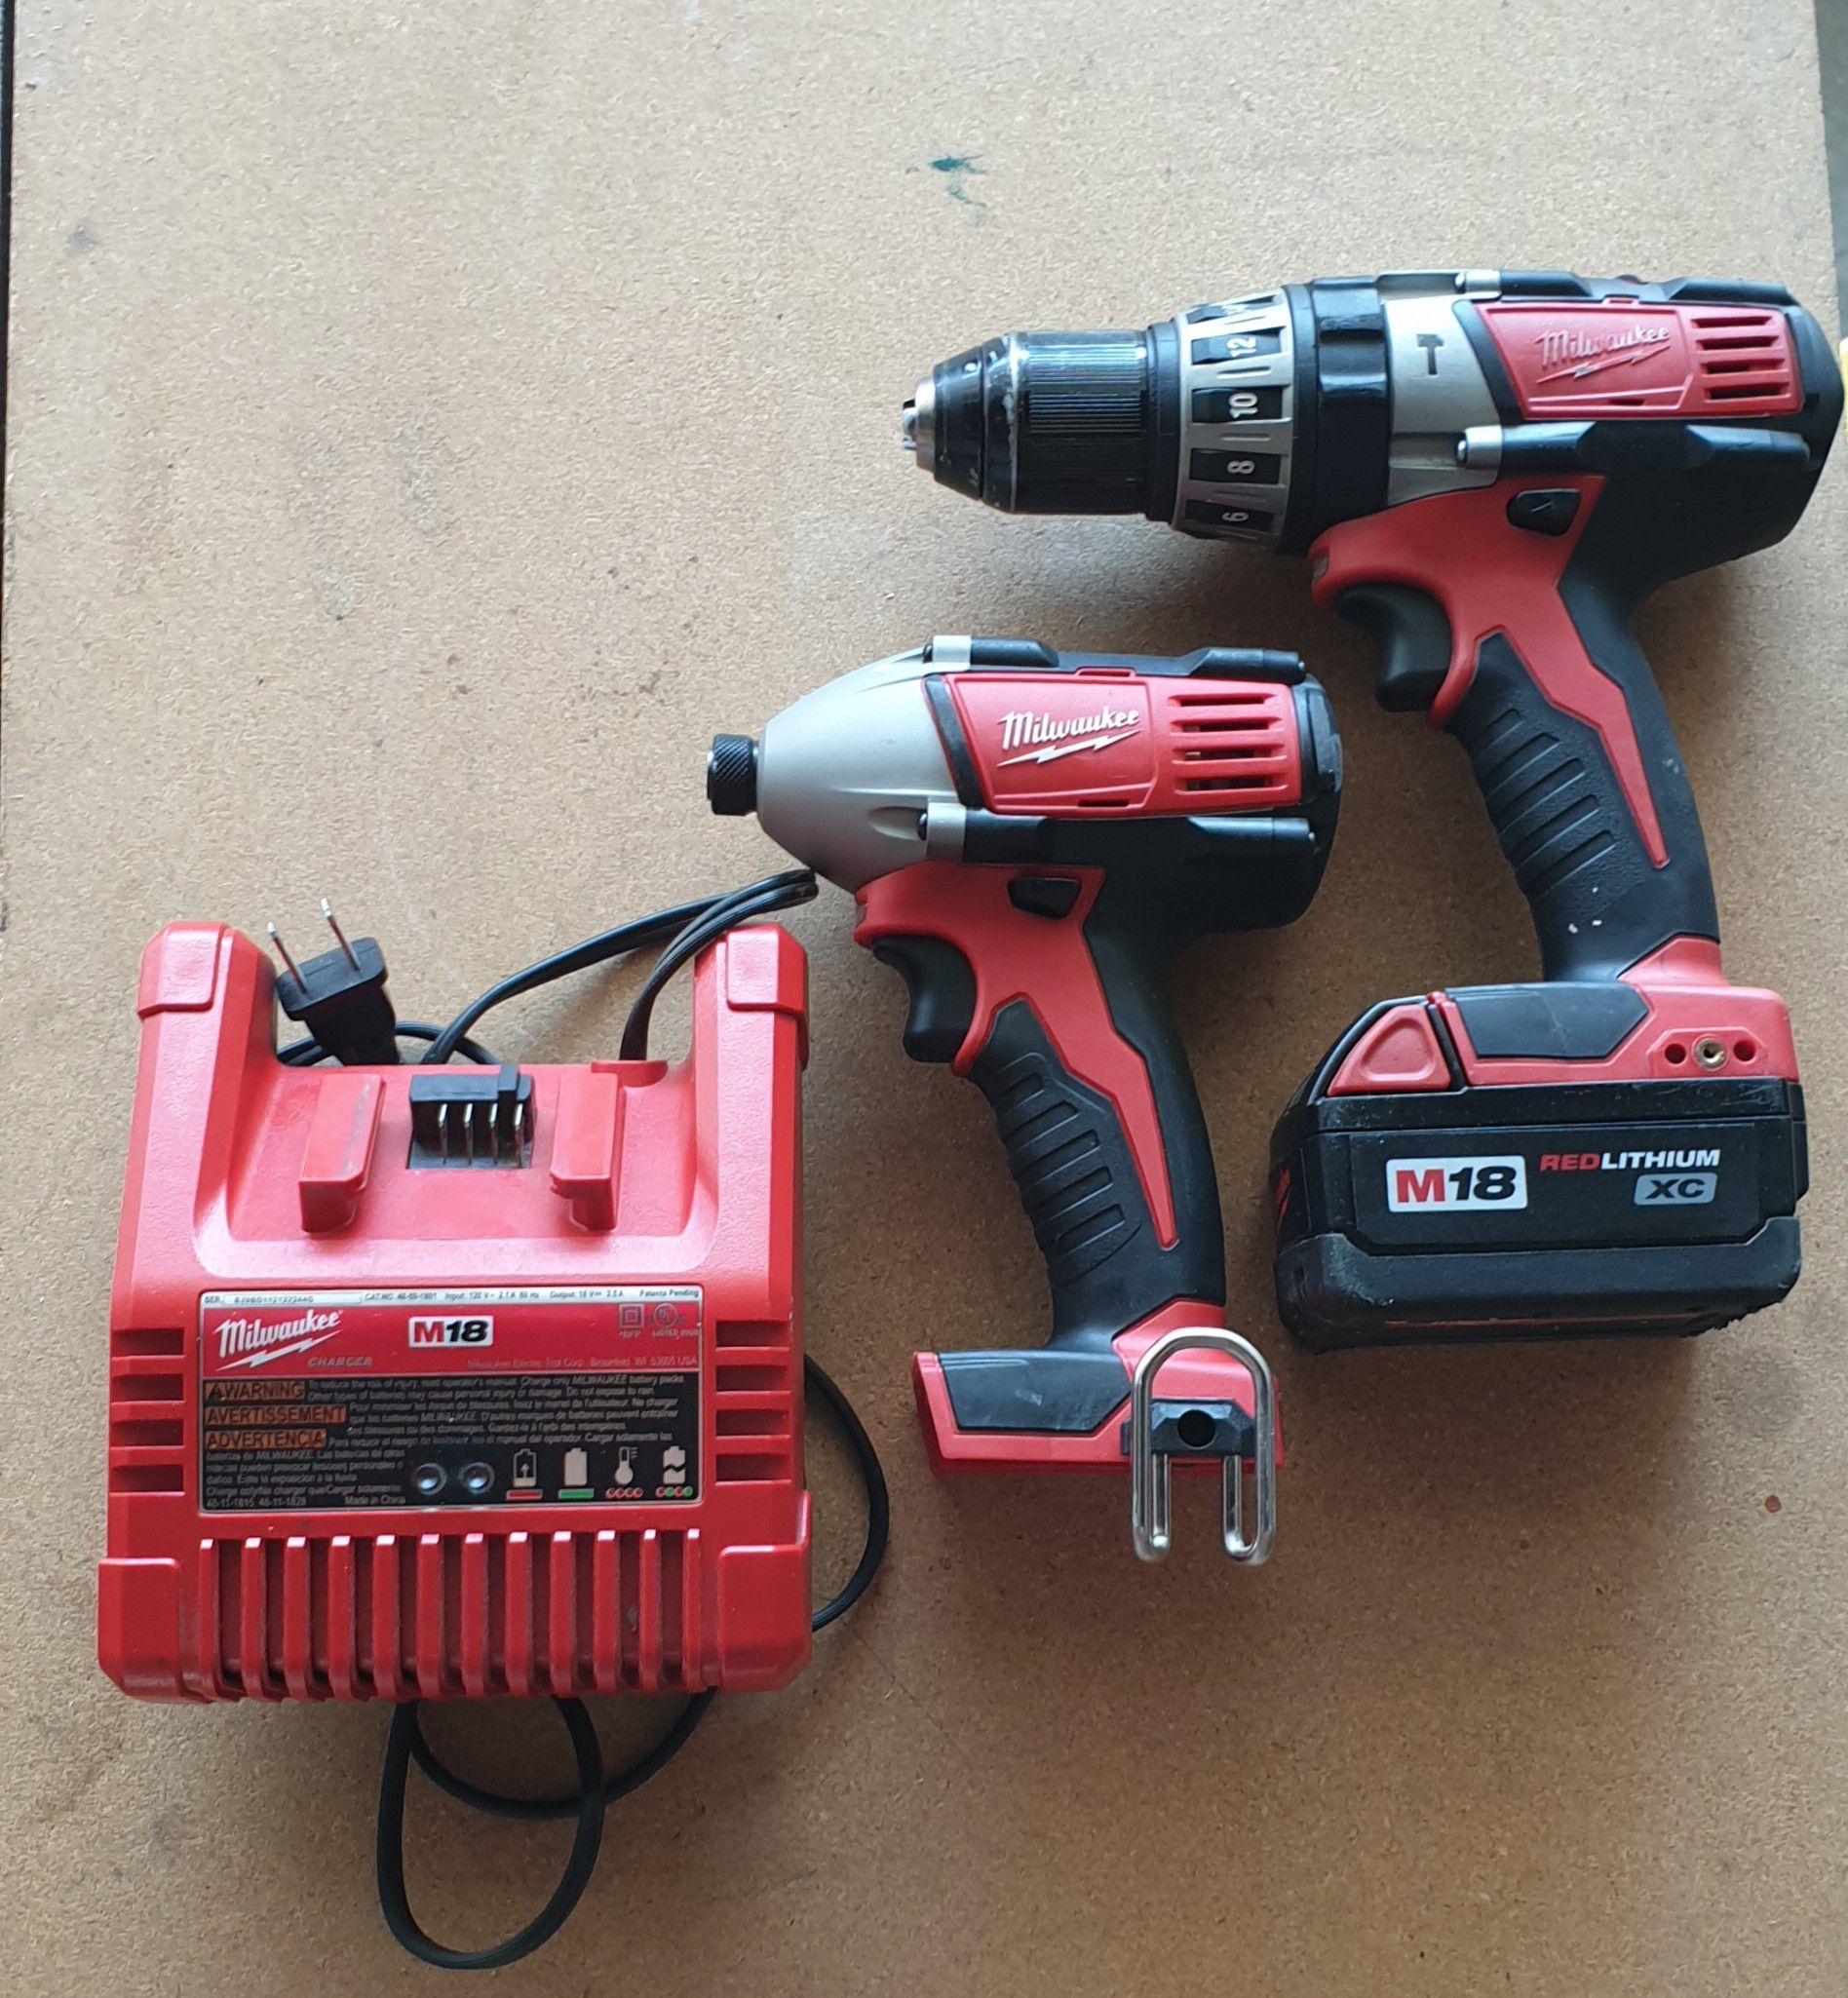 Milwaukee m18 1/2 hammer drill and impact driver combo comes with red lithium xc battery and charger